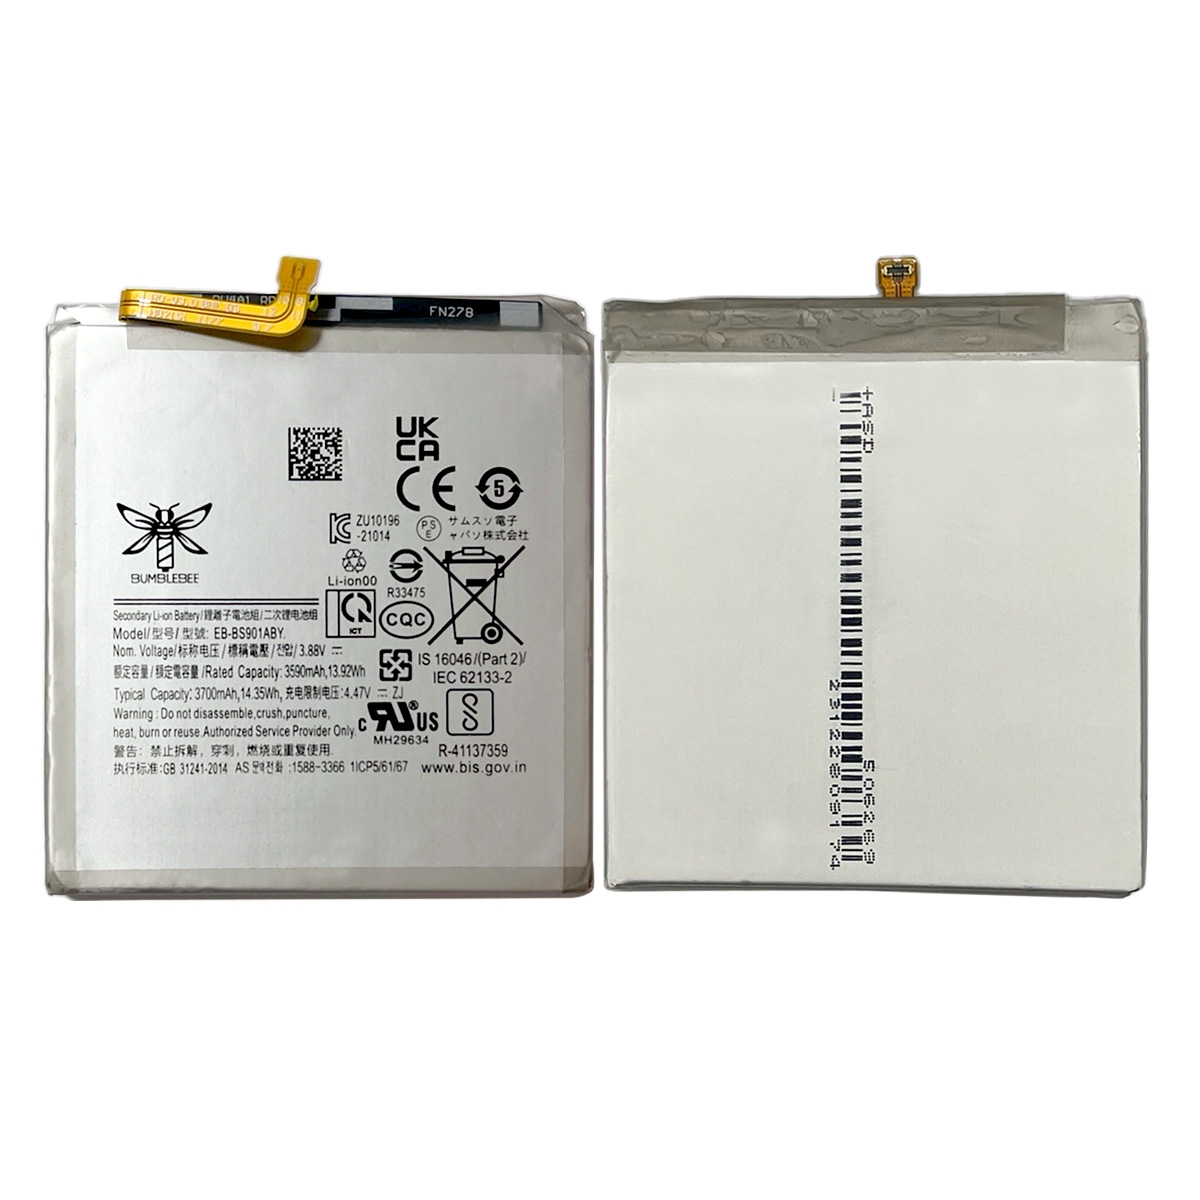 3.83V 3590mAh Battery for Samsung Galaxy S22 5G S901 Compatible